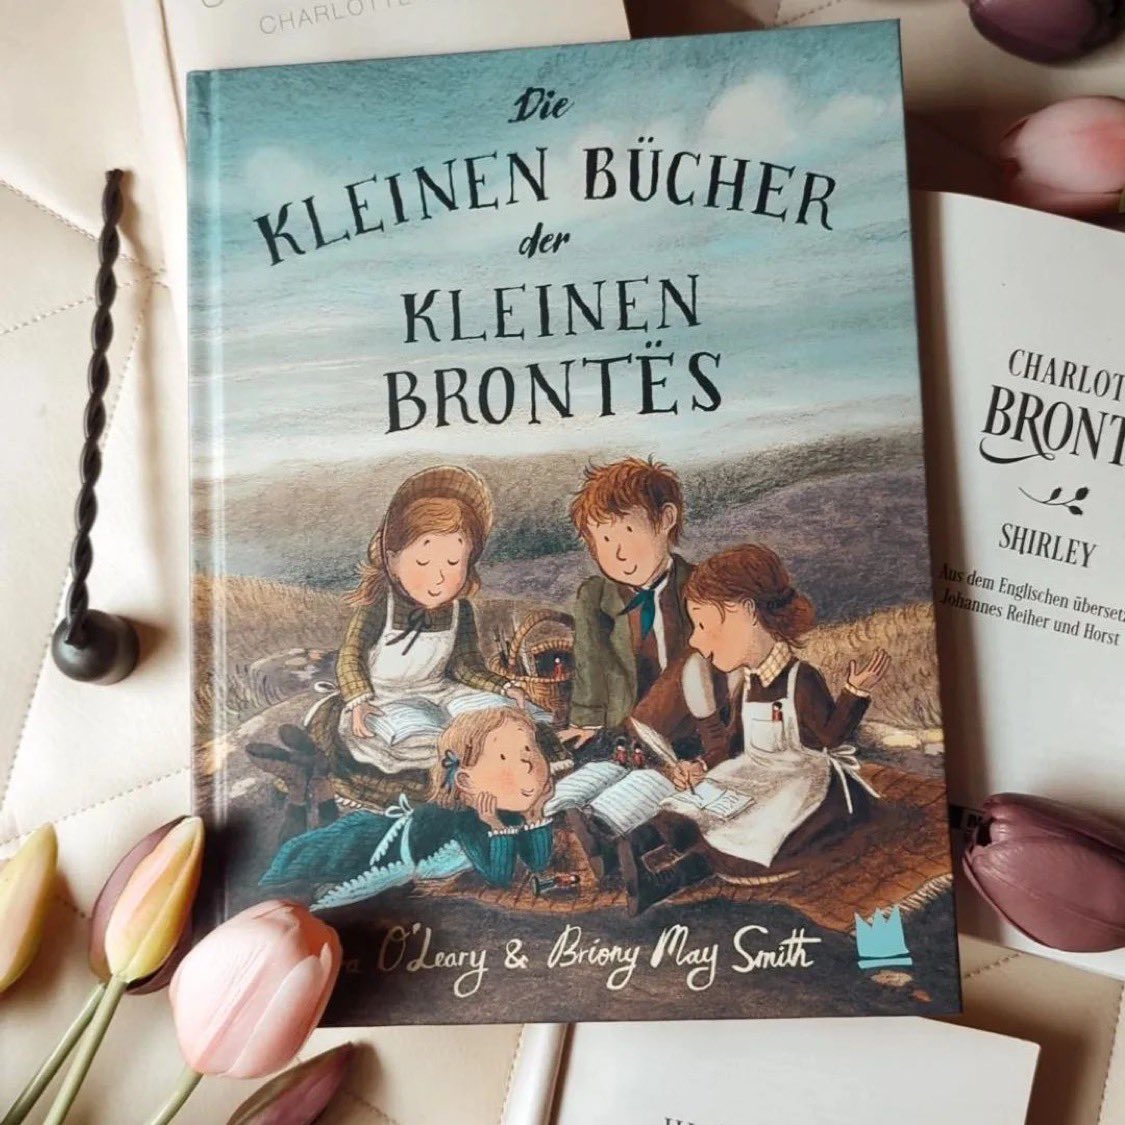 Our book is out in Germany this week. Have found that European readers post the loveliest photos on Instagram! @BrionyMaySmith